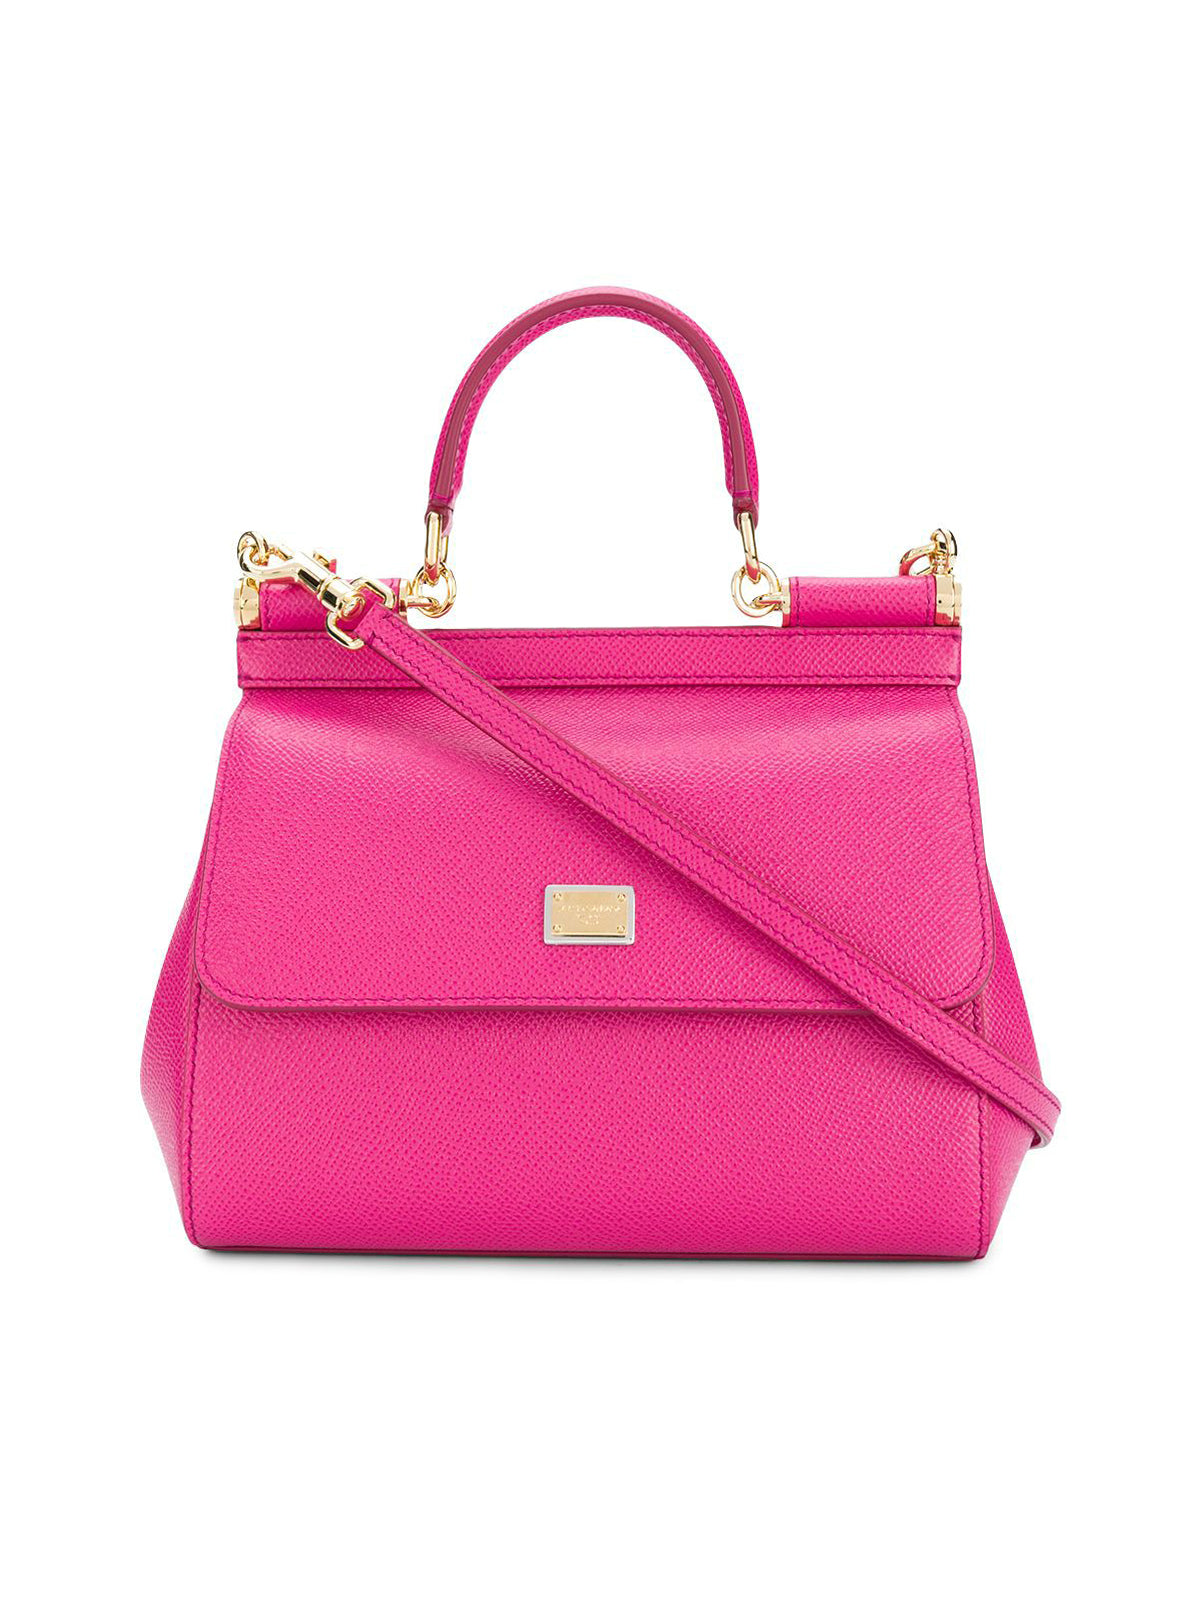 PINK DOLCE & GABBANA SMALL SICILY BAG IN DAUPHINE LEATHER